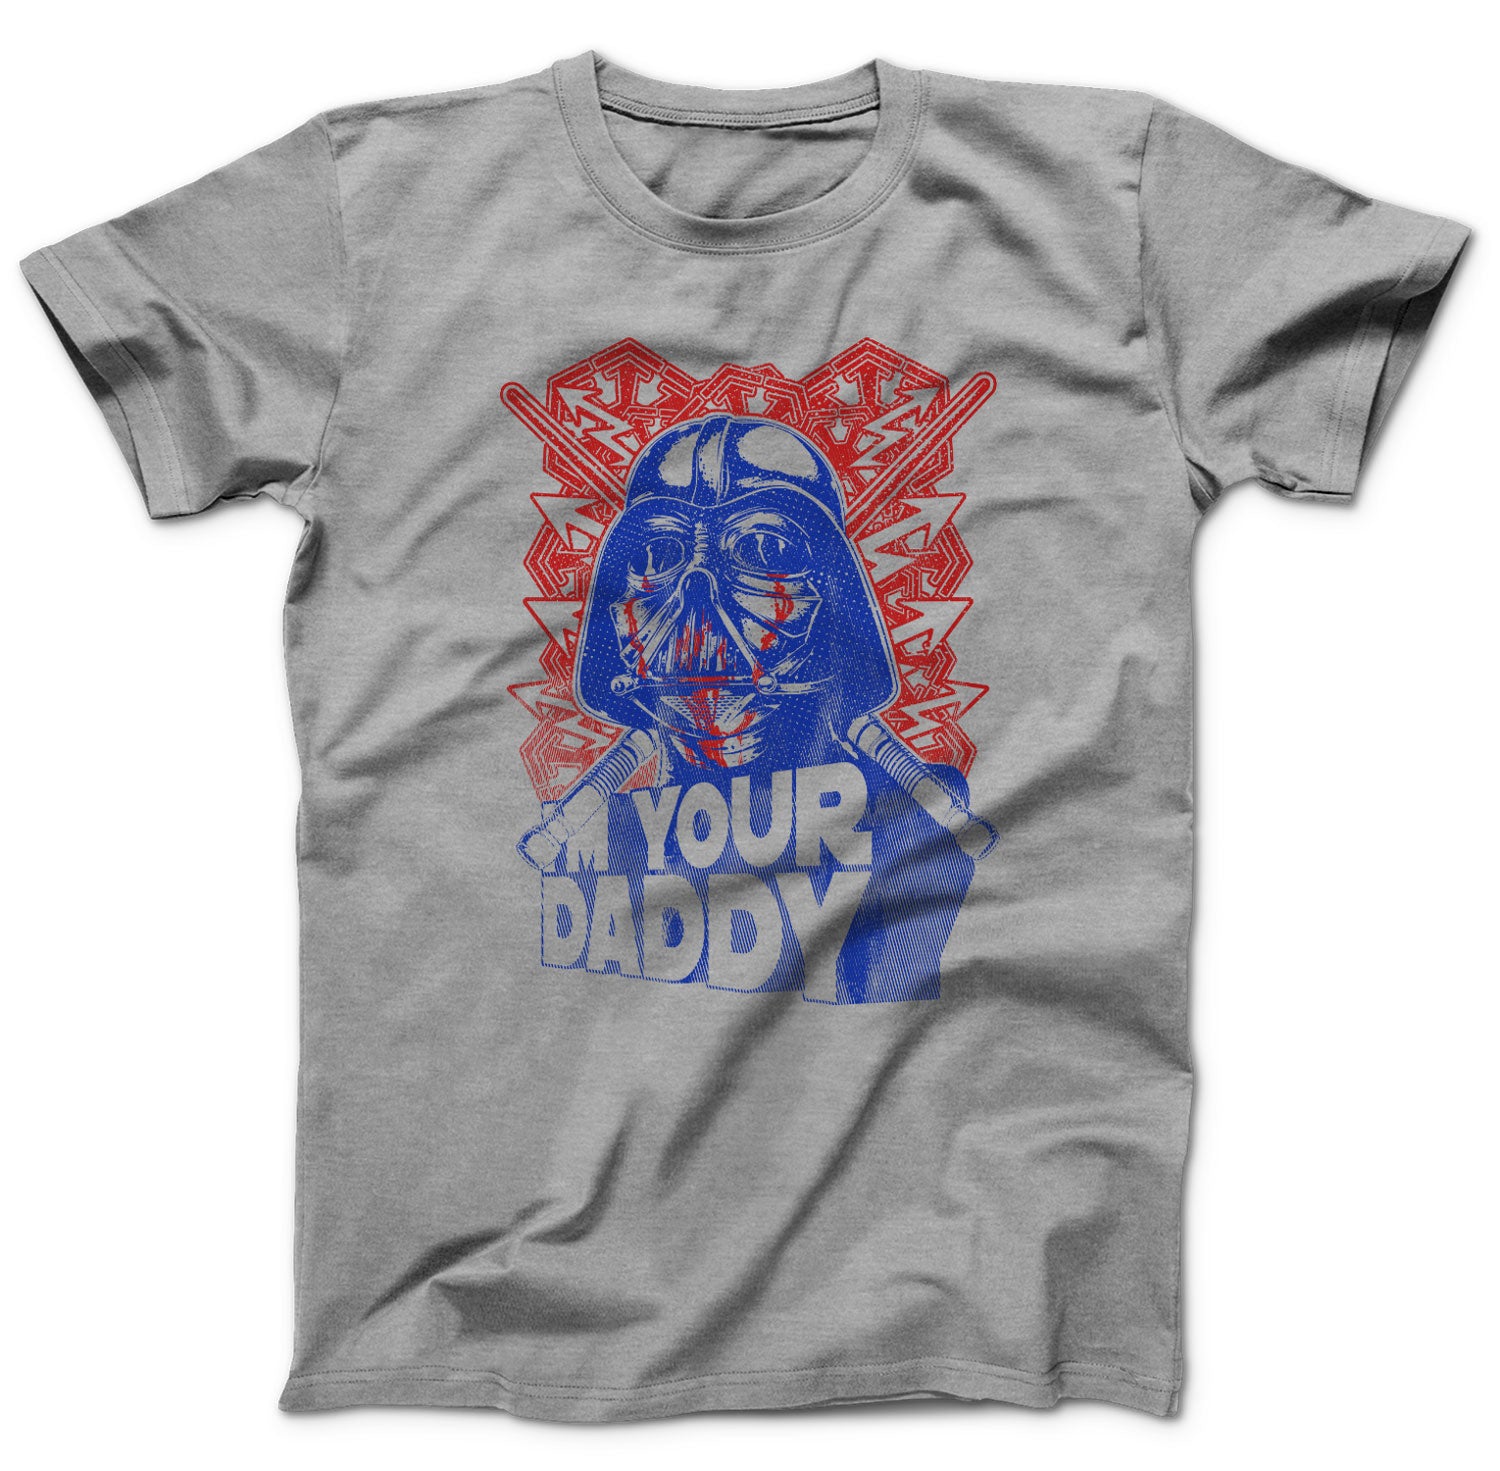 Darth Vader: Who's Your Daddy, Men's Tee